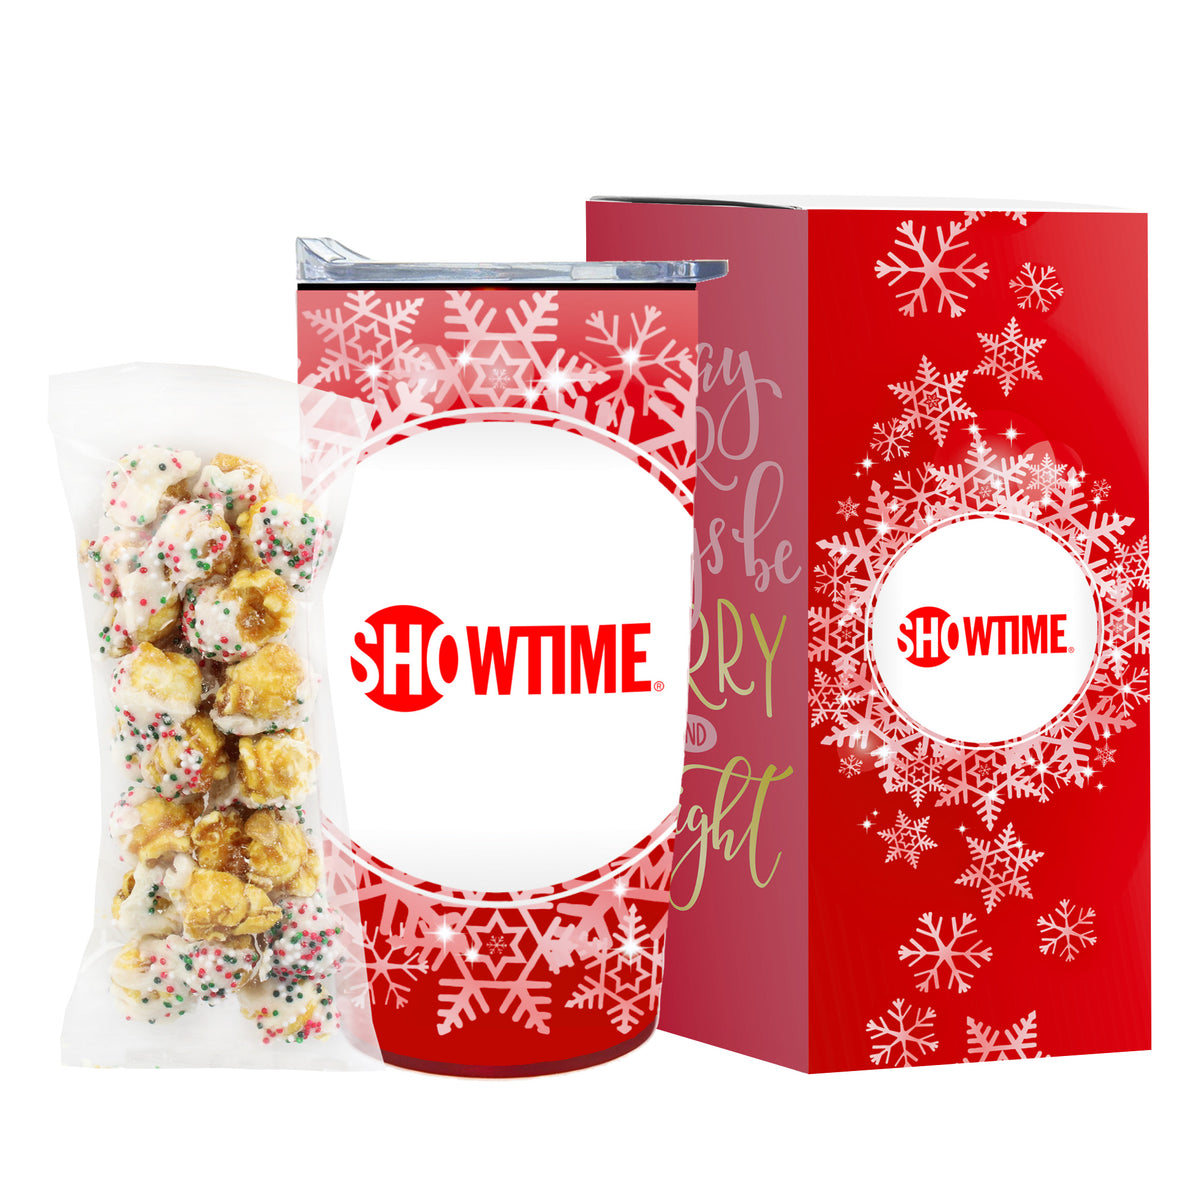 Straight Tumbler w/ Plastic Liner - 20 oz., Holiday Greetings Gift Set, Sugar Cookie Crunch Popcorn